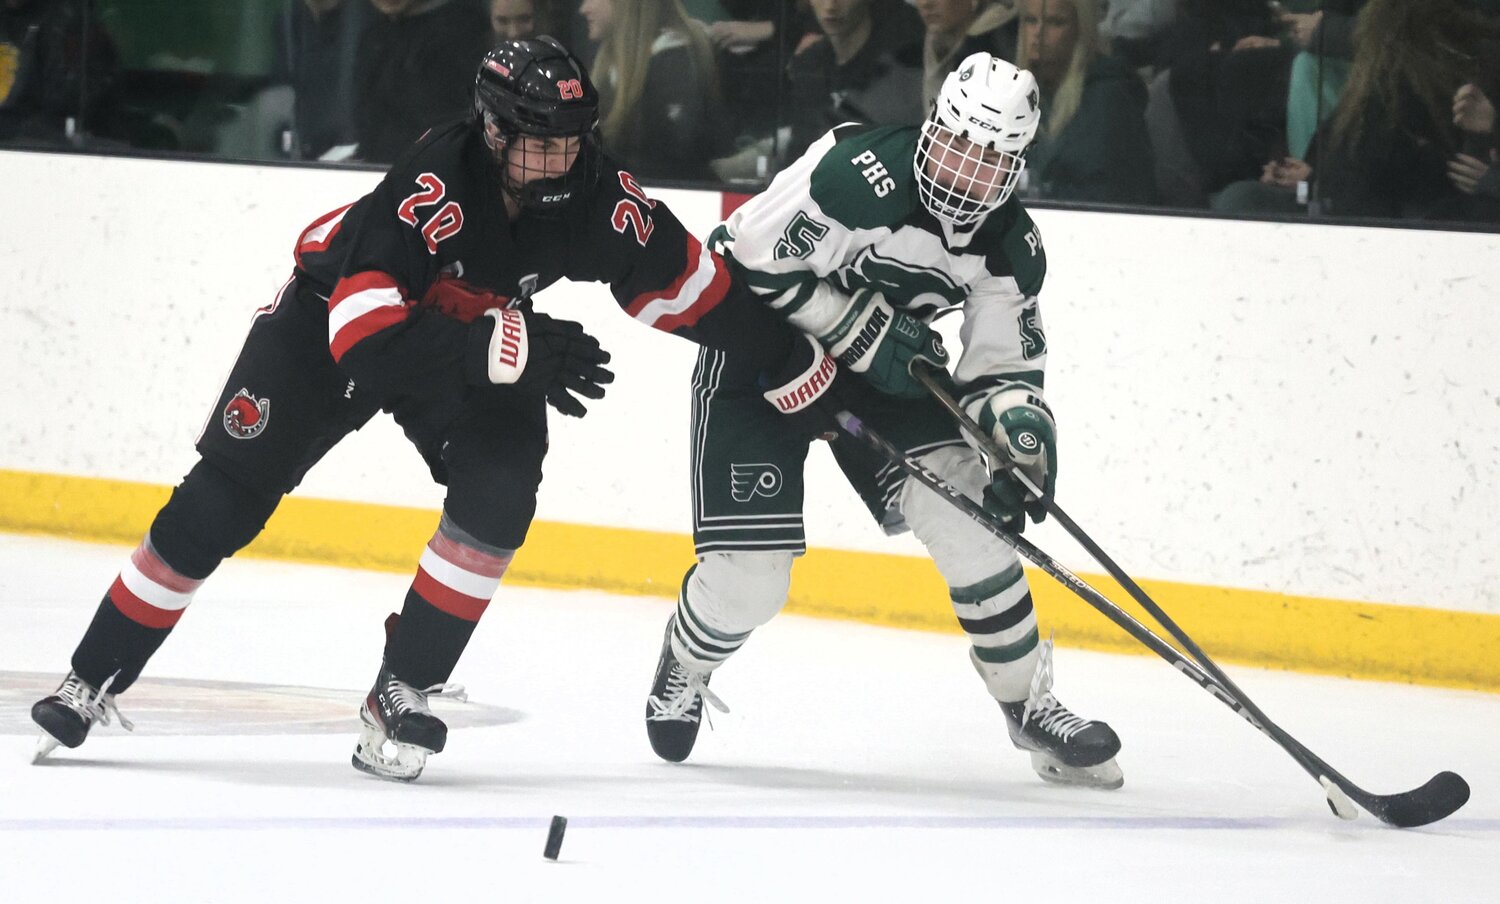 Park sophomore forward Gavin Sand fights to get to the puck before a Stillwater opponent.